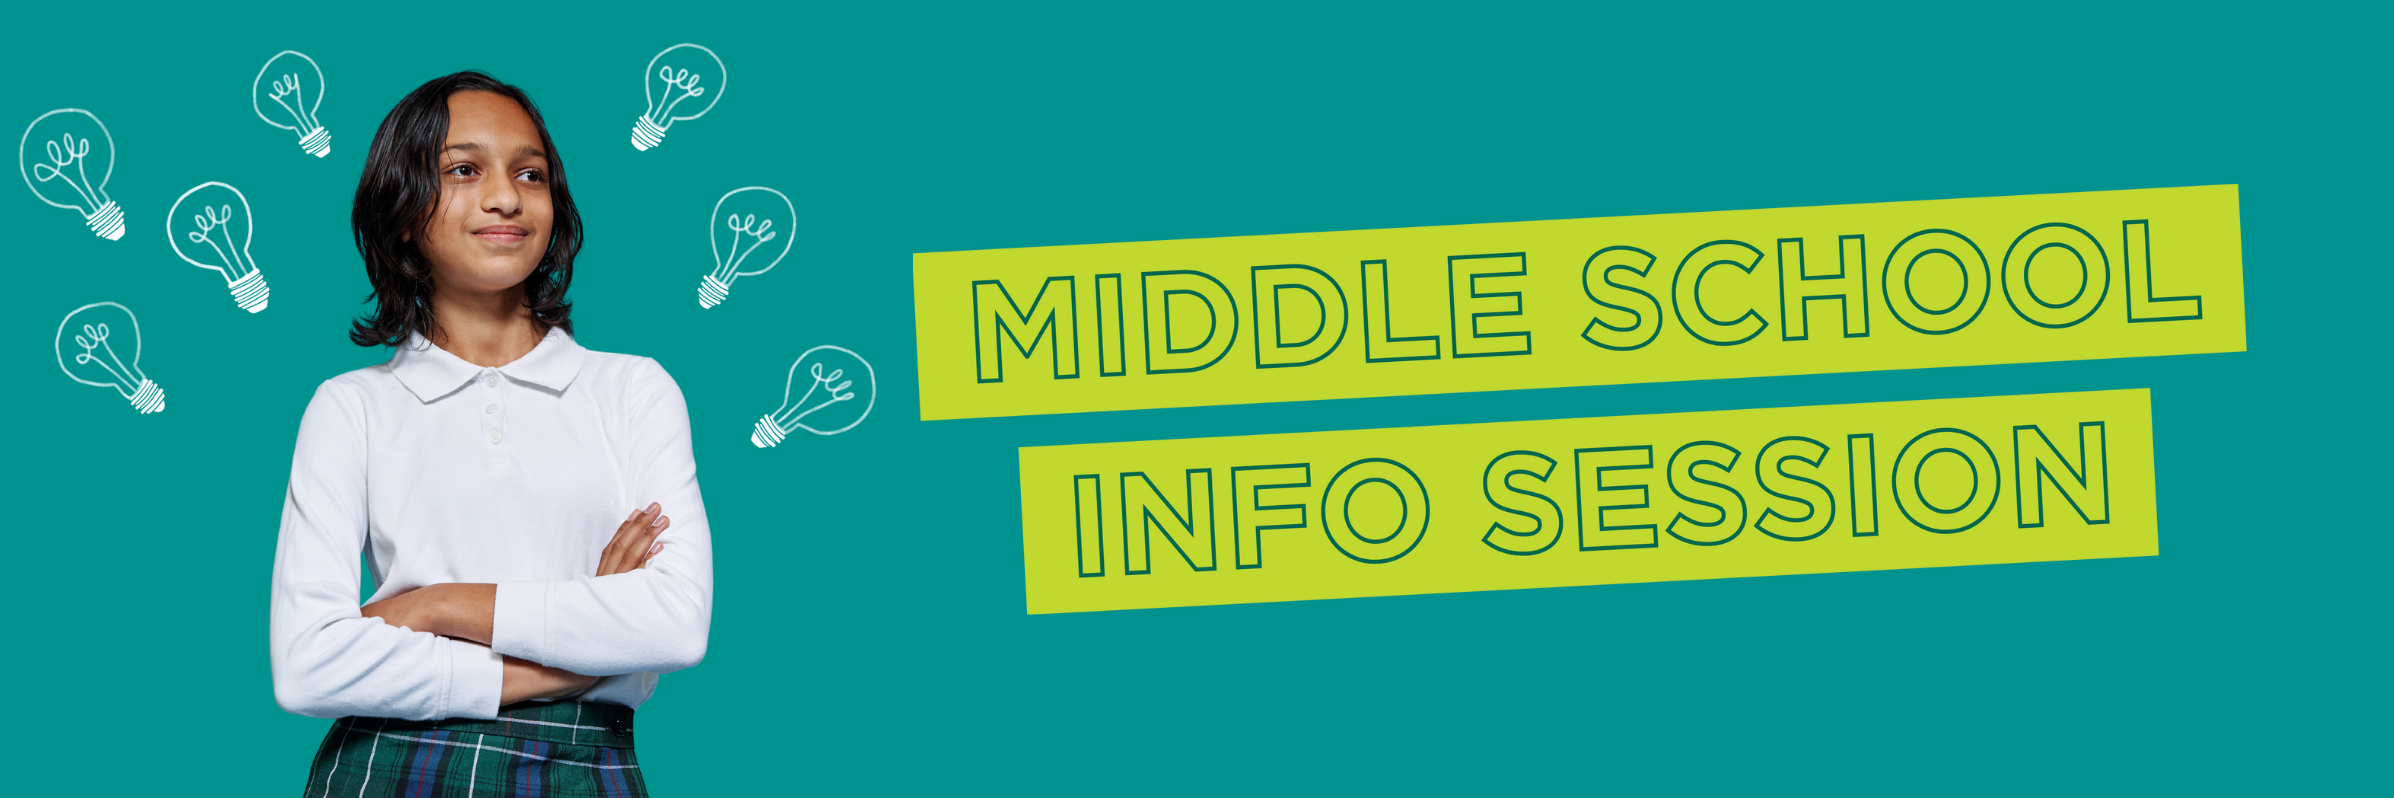 Middle School Info Session